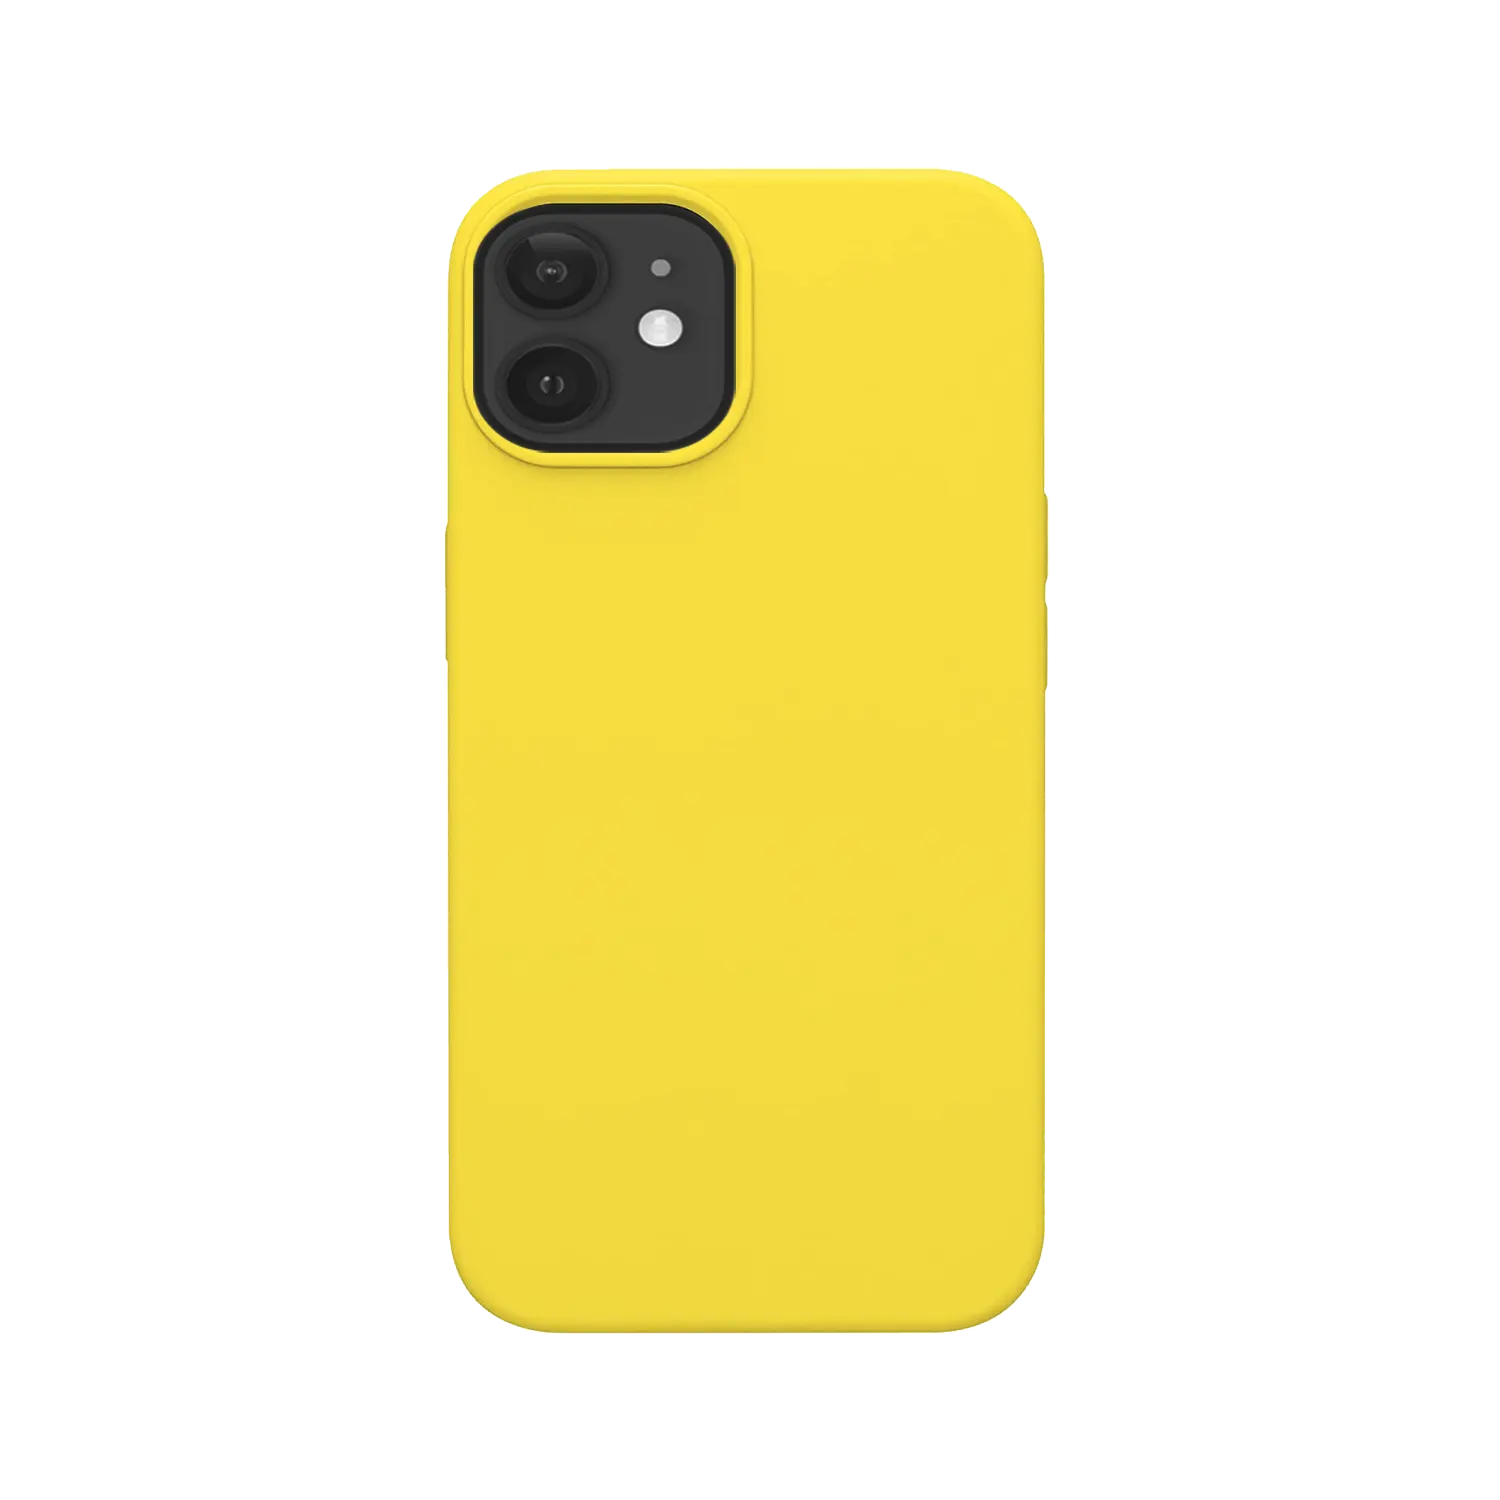 yellow silicone iphone 11 case